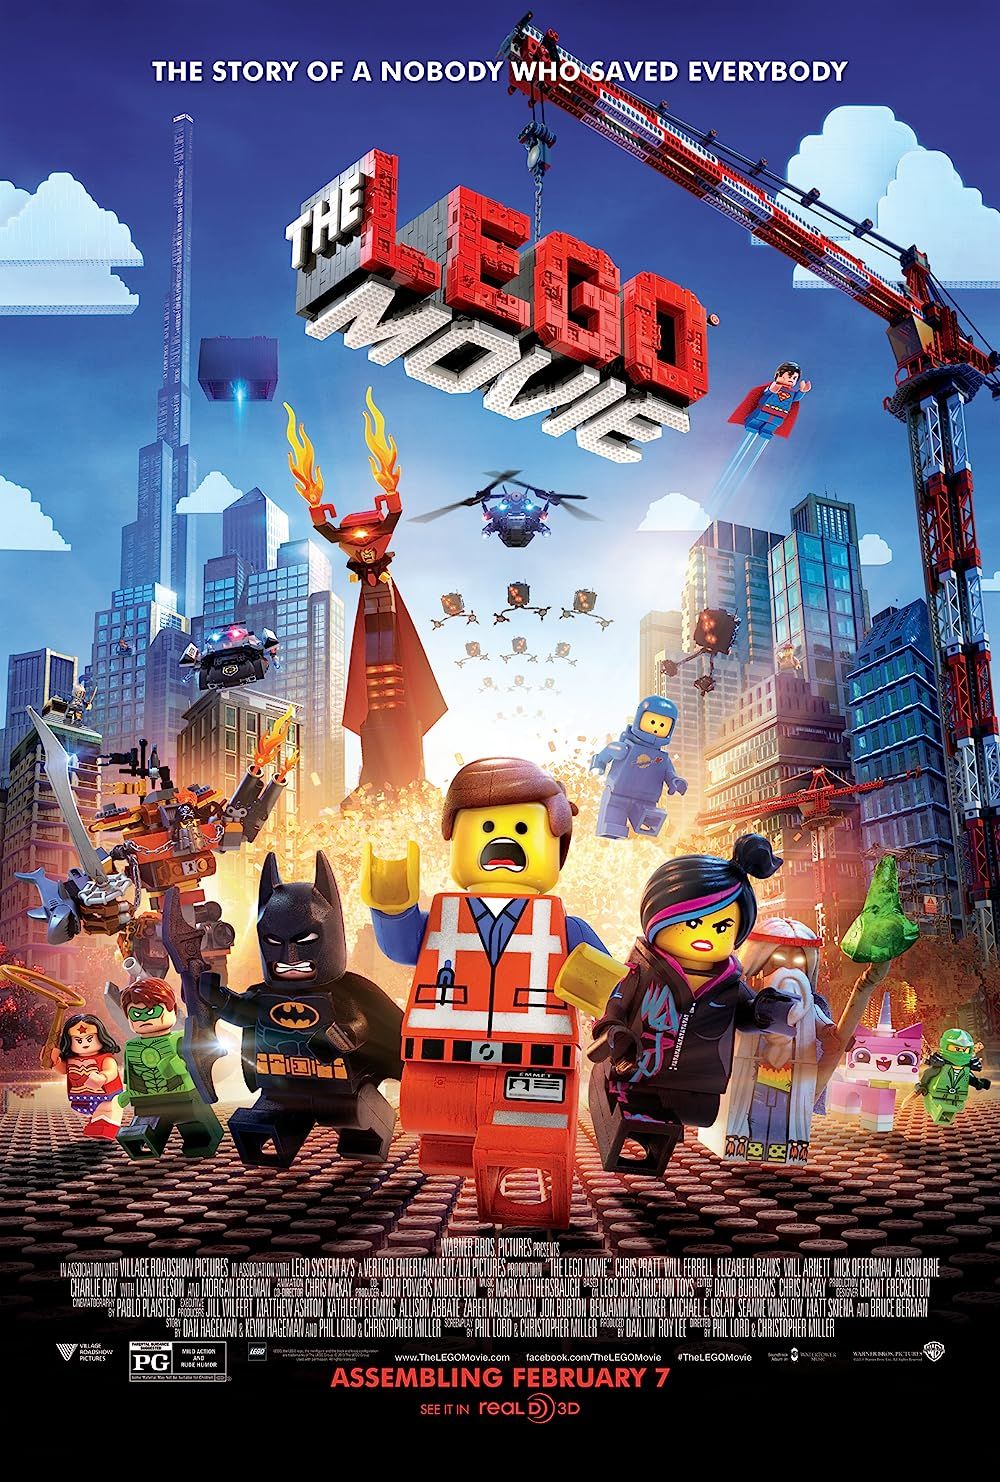 The Cast on The LEGO Movie Poster